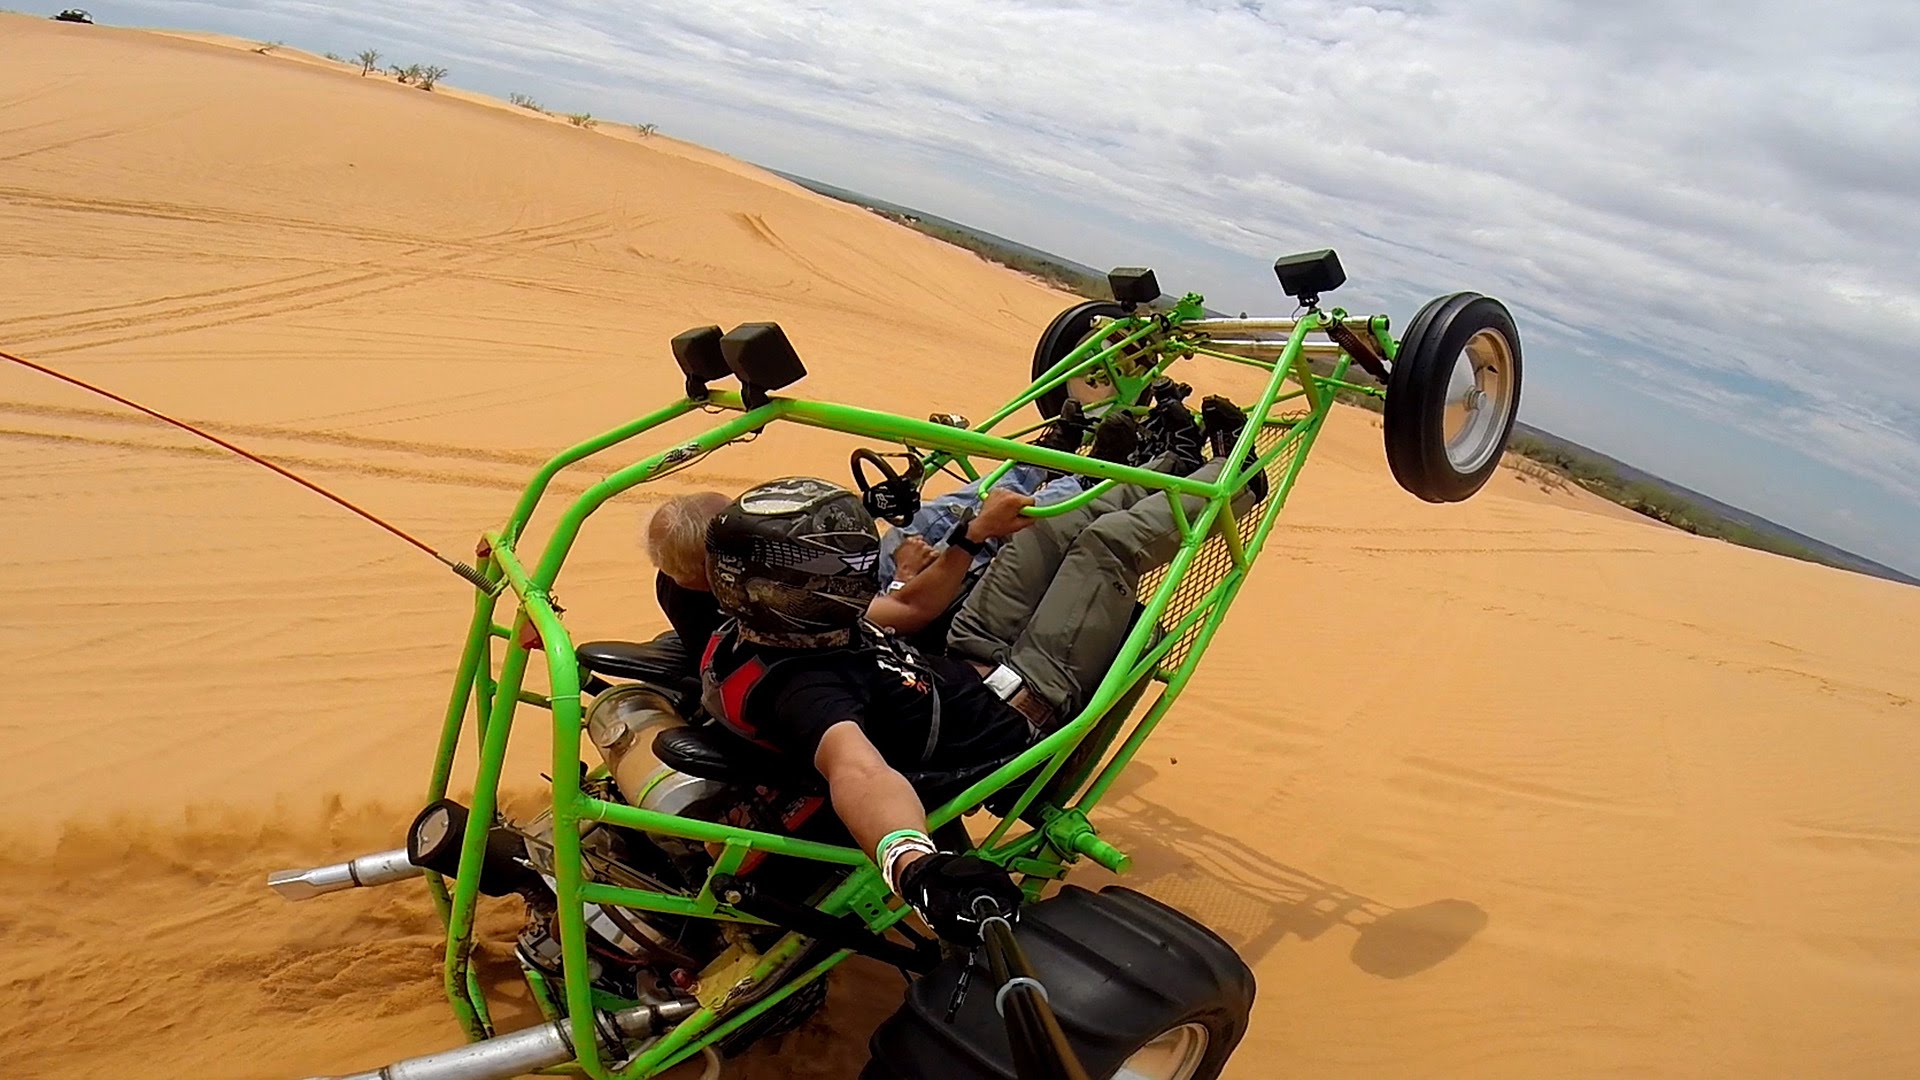 Dune Buggy Wallpaper Vehicles Hq Pictures